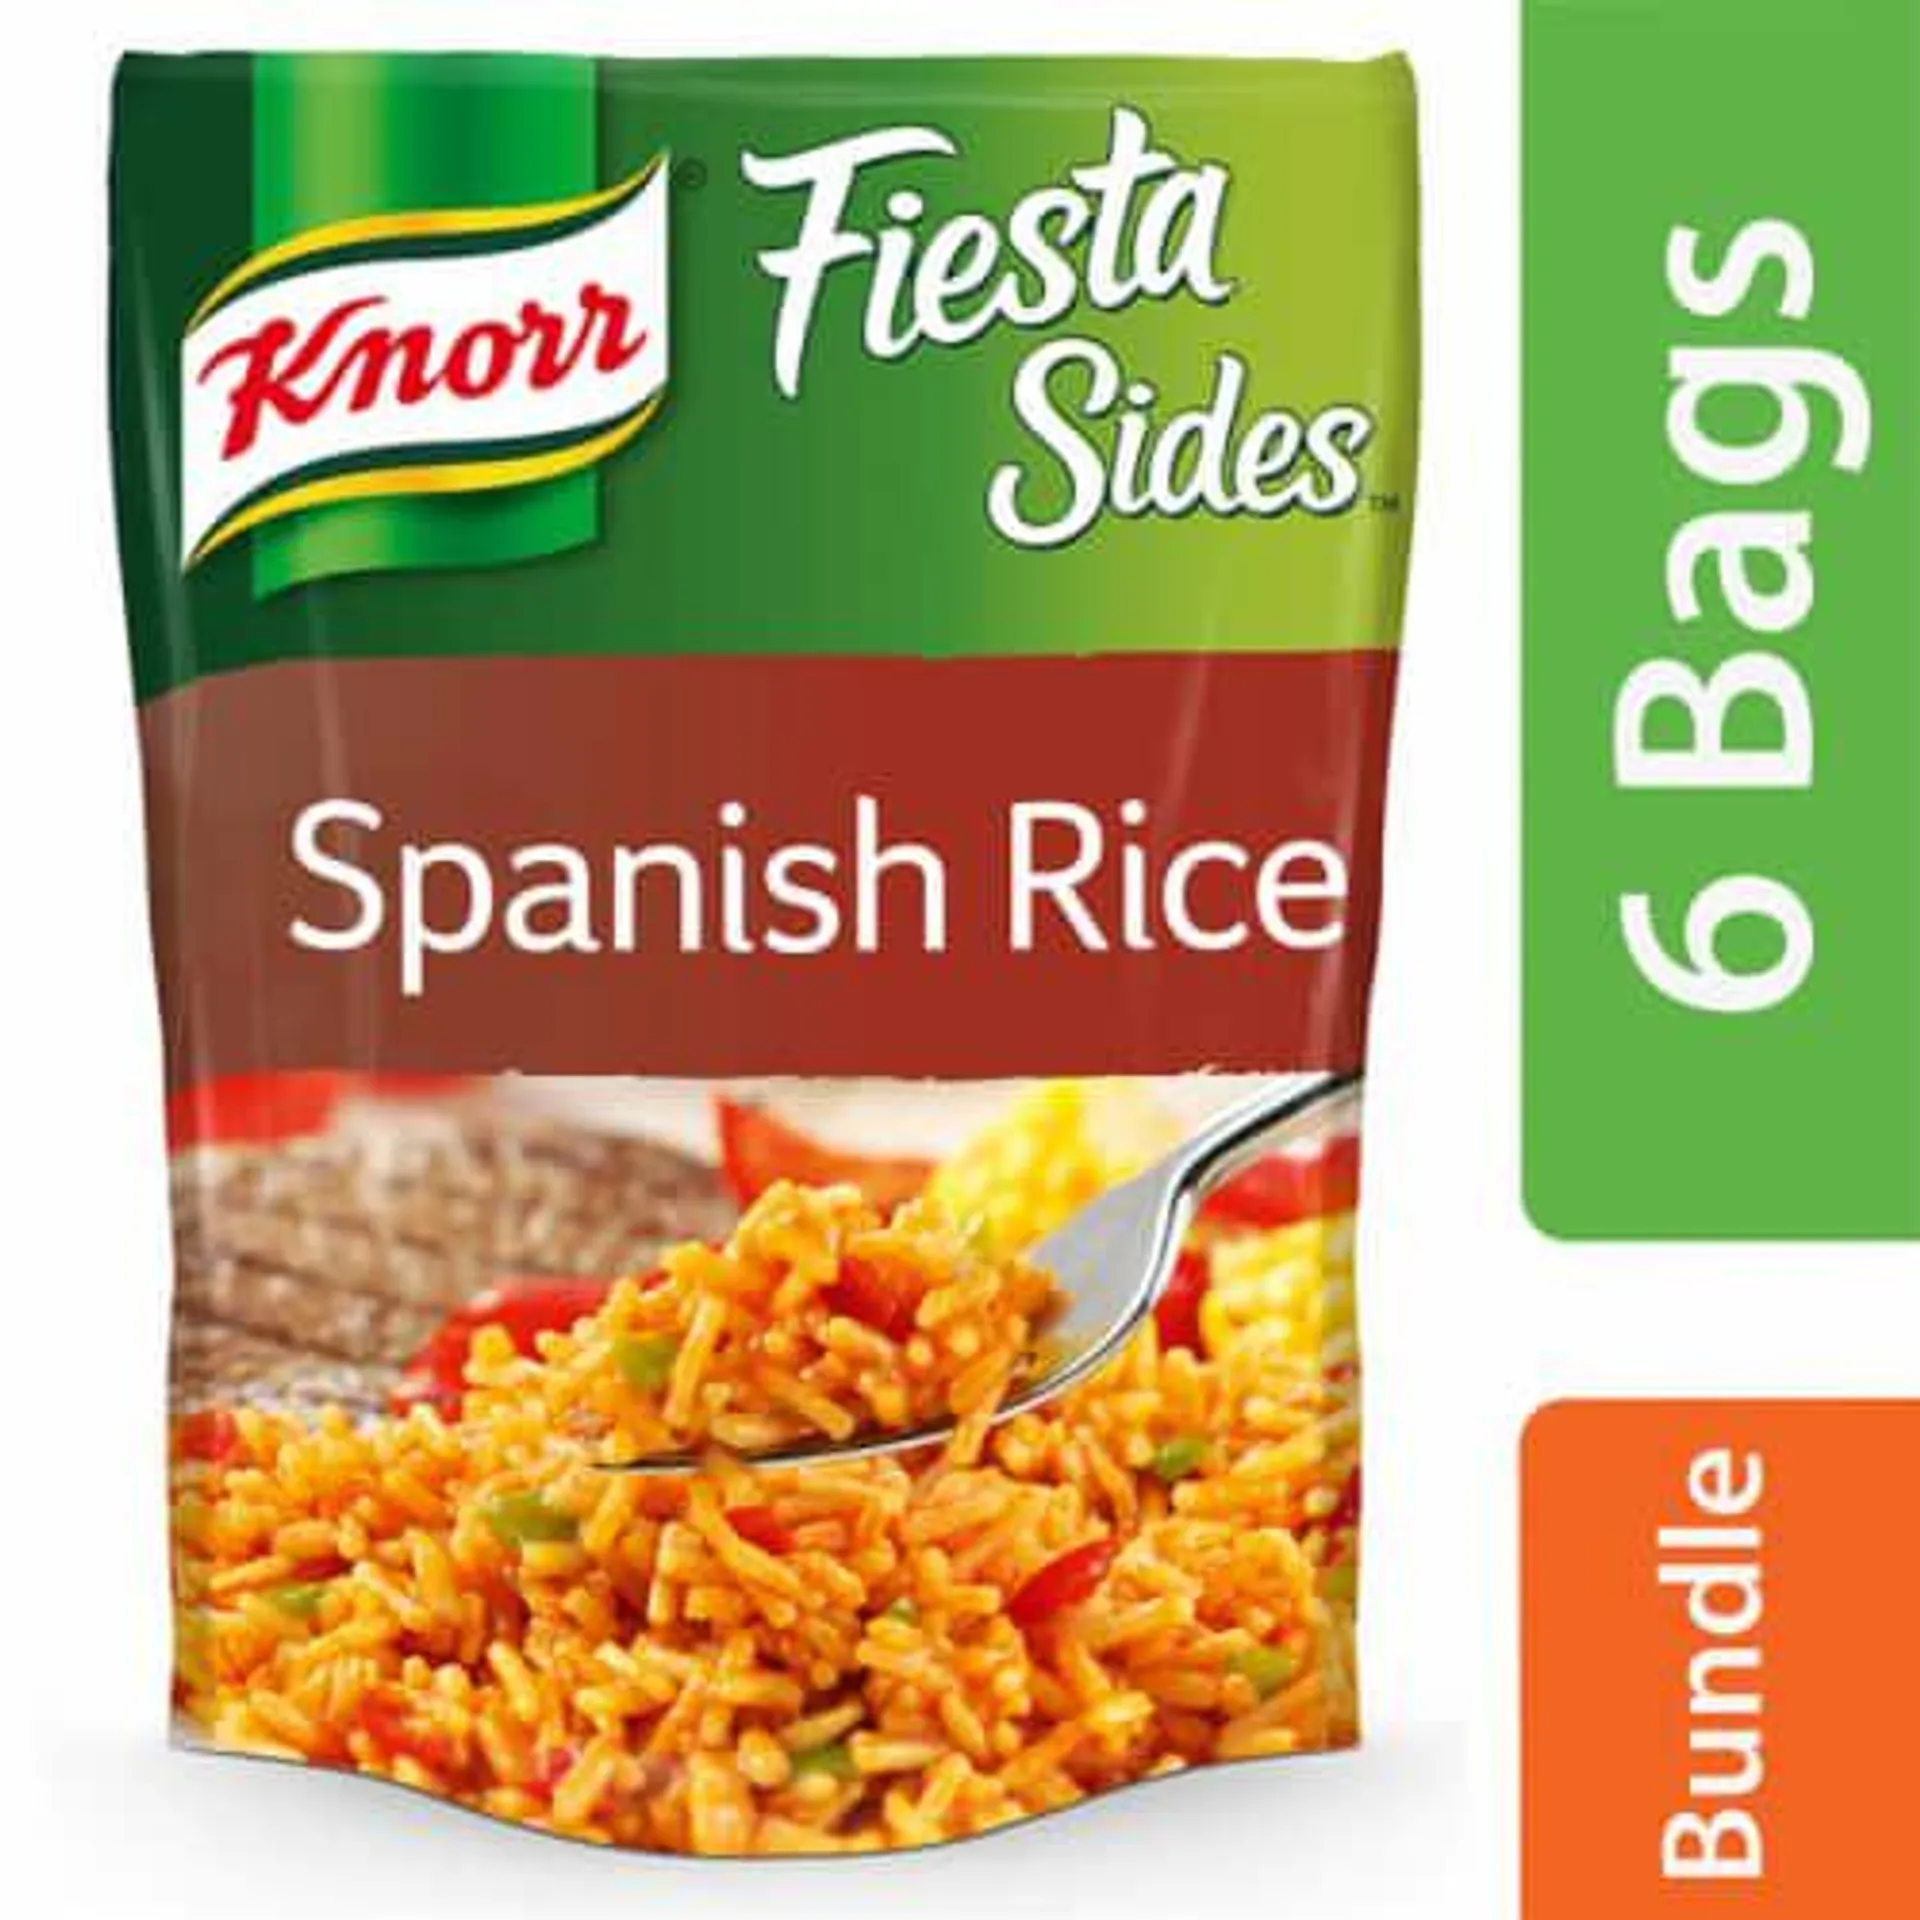 Knorr Rice Sides Spanish Rice Cooks in 7 Minutes No Artificial Flavors (Pack of 12)